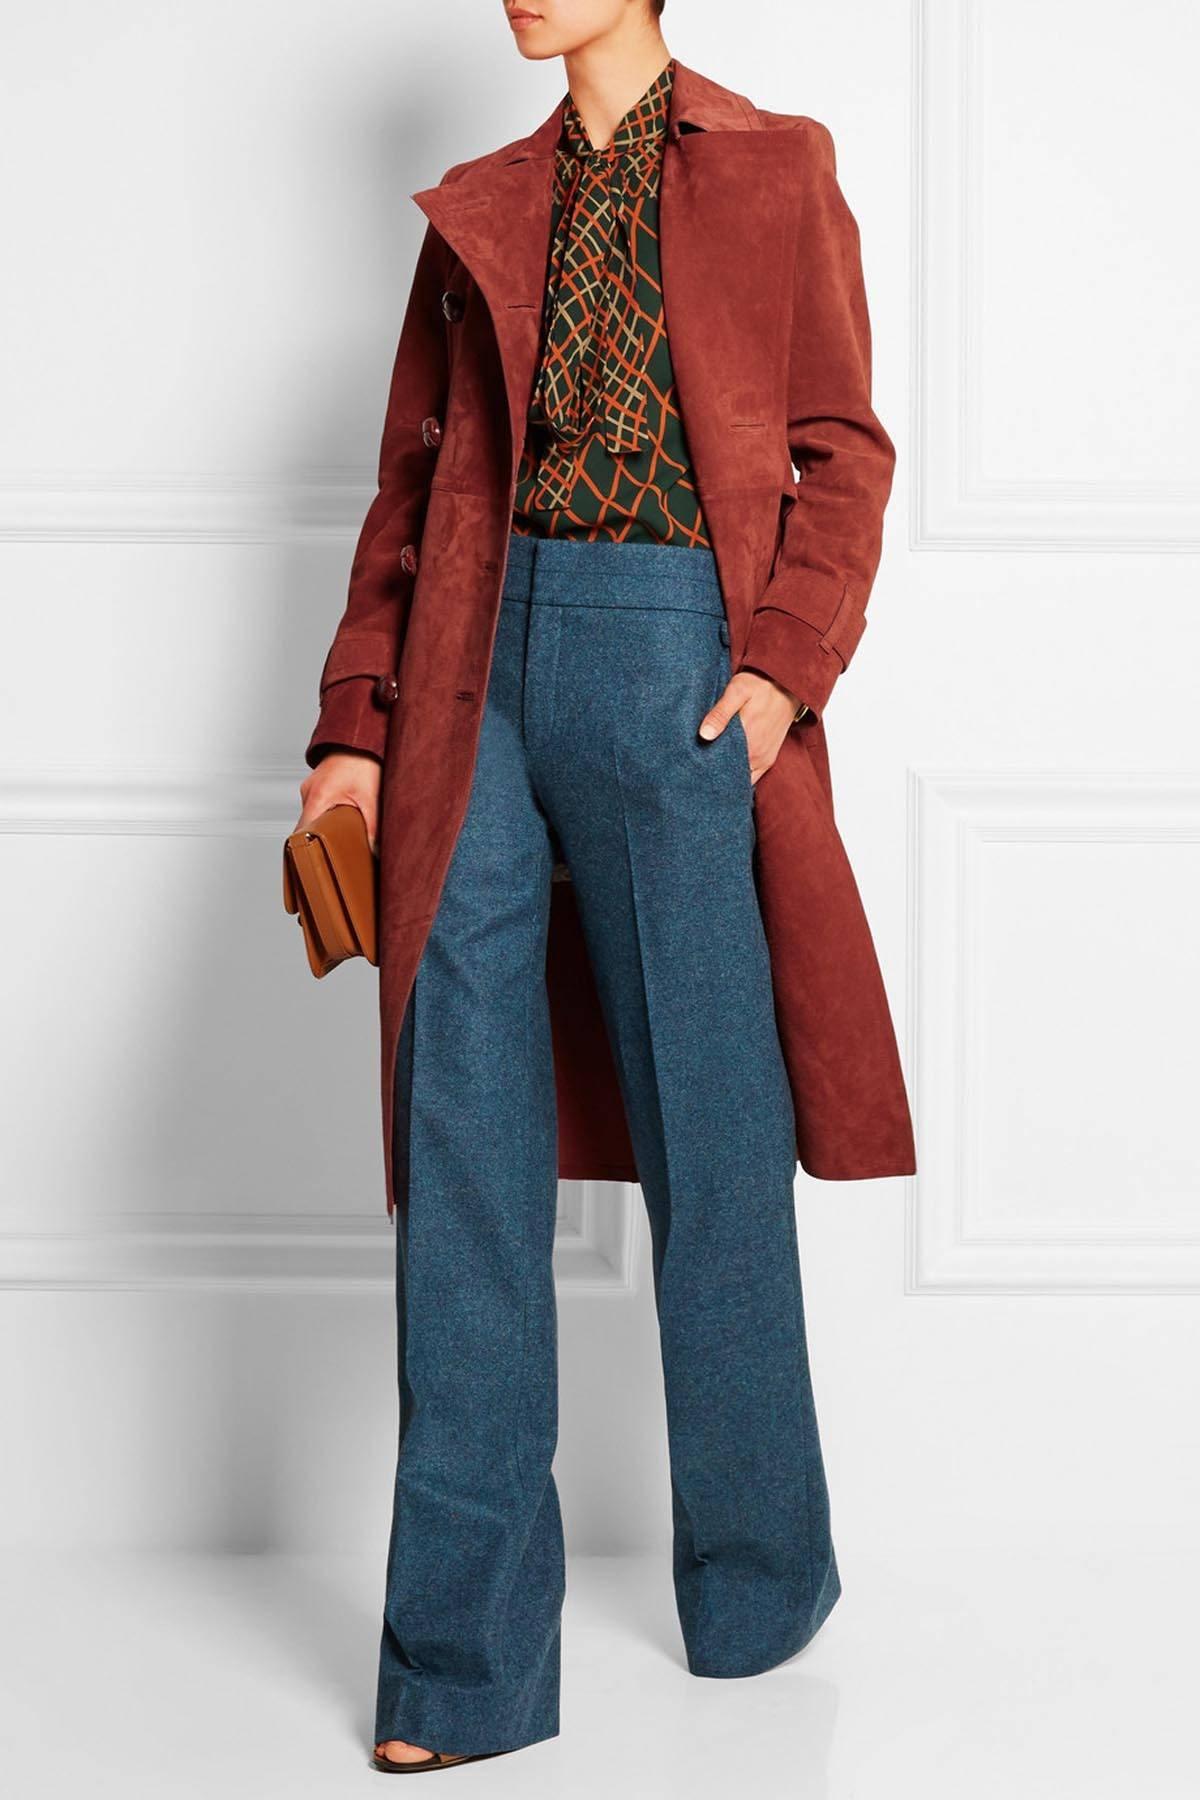 New GUCCI Suede Leather Trench Coat

F/W 2015 Collection

Coat Has Been Tailored from Luxuriously Weighty Suede in Slim-Fitting Silhouette

Italian sizes 40 and 42 available

Color - Brick Red

Designer Color - Roasted Sand

100% Suede Leather